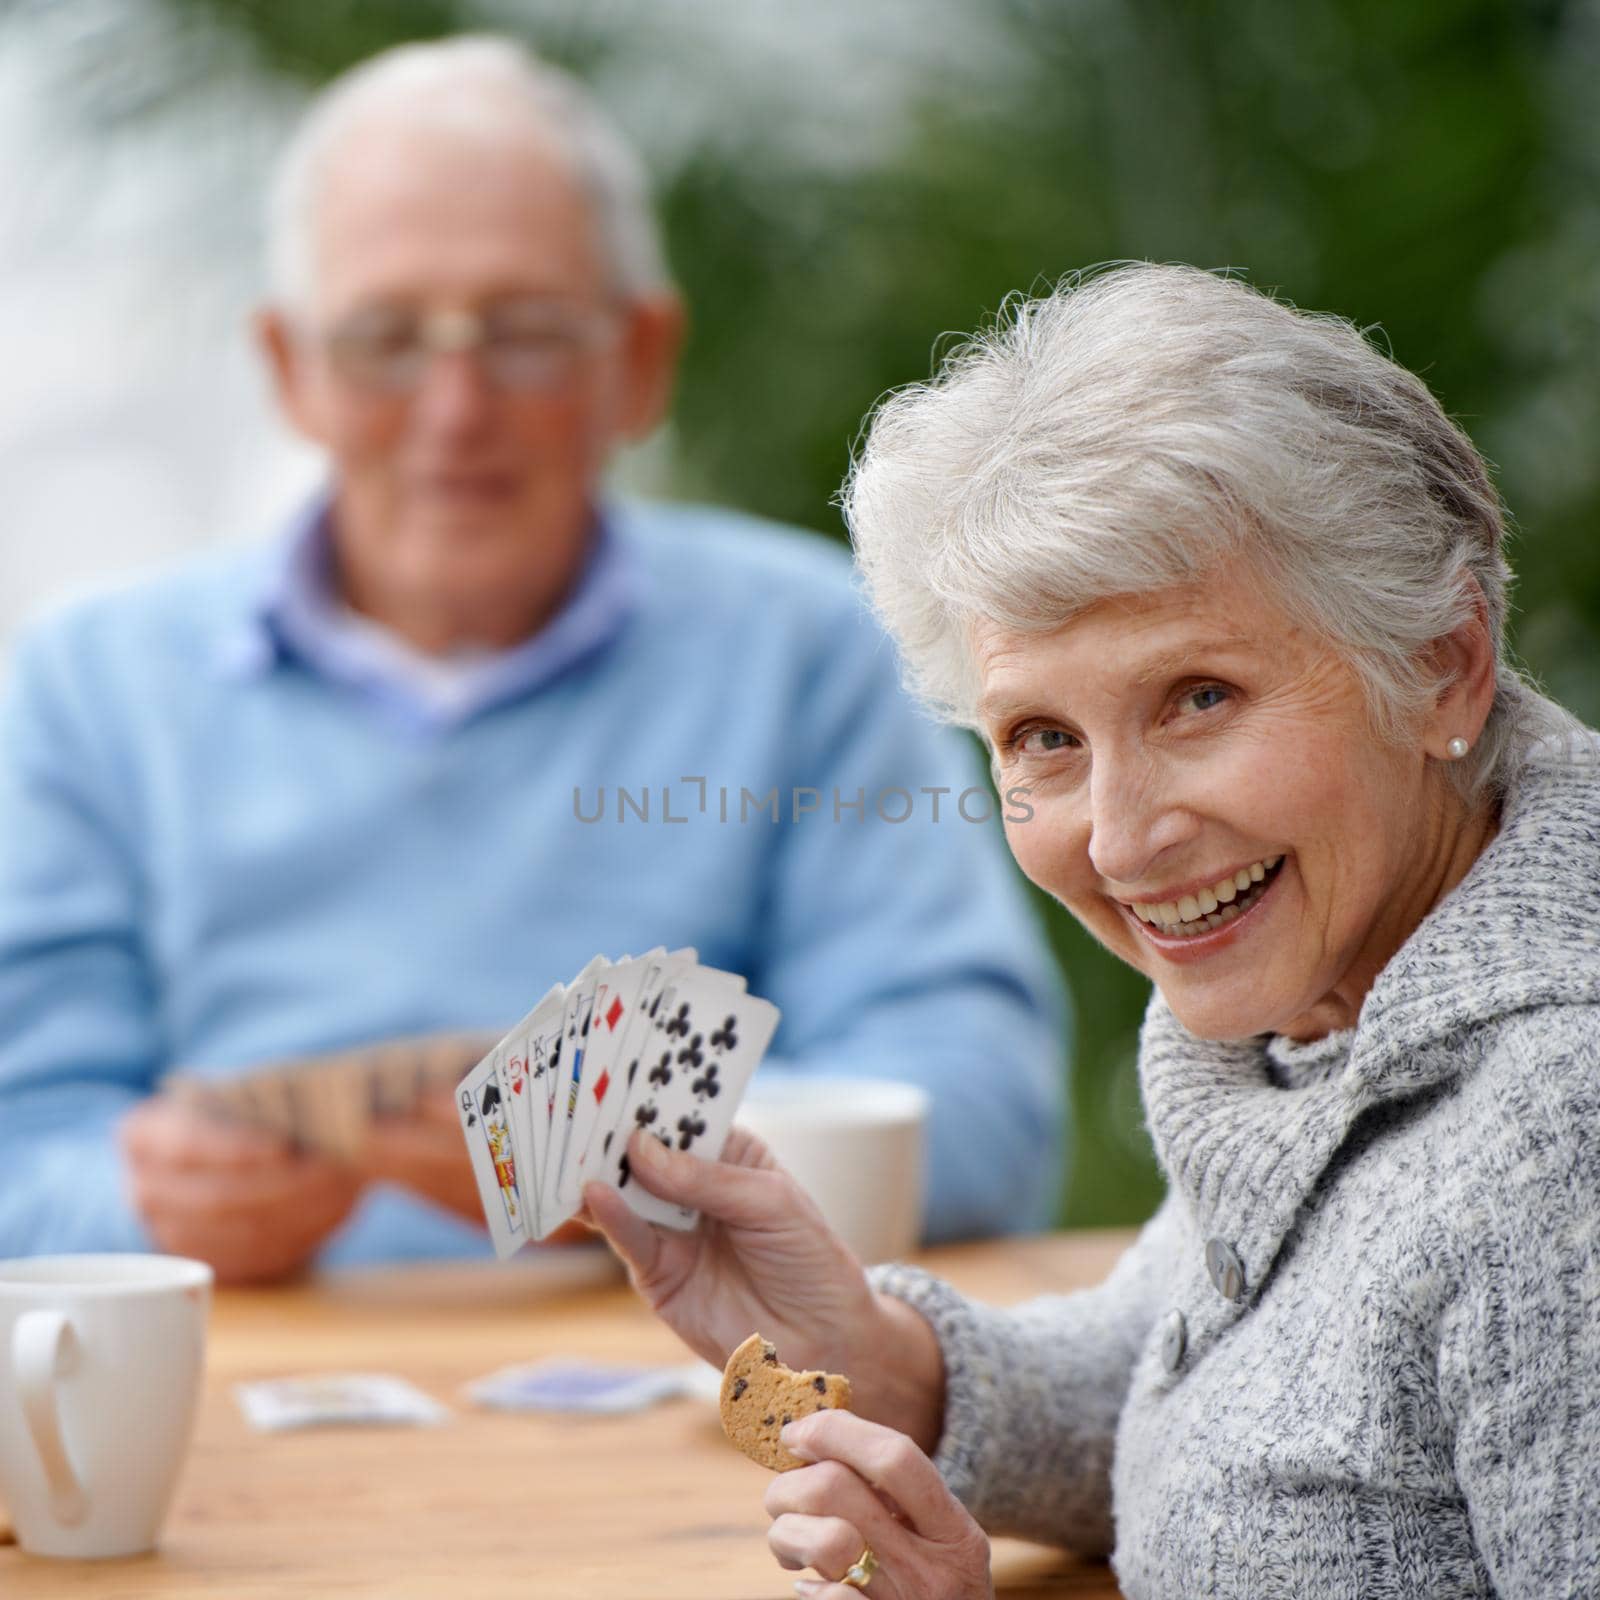 Two seniors playing cards together.